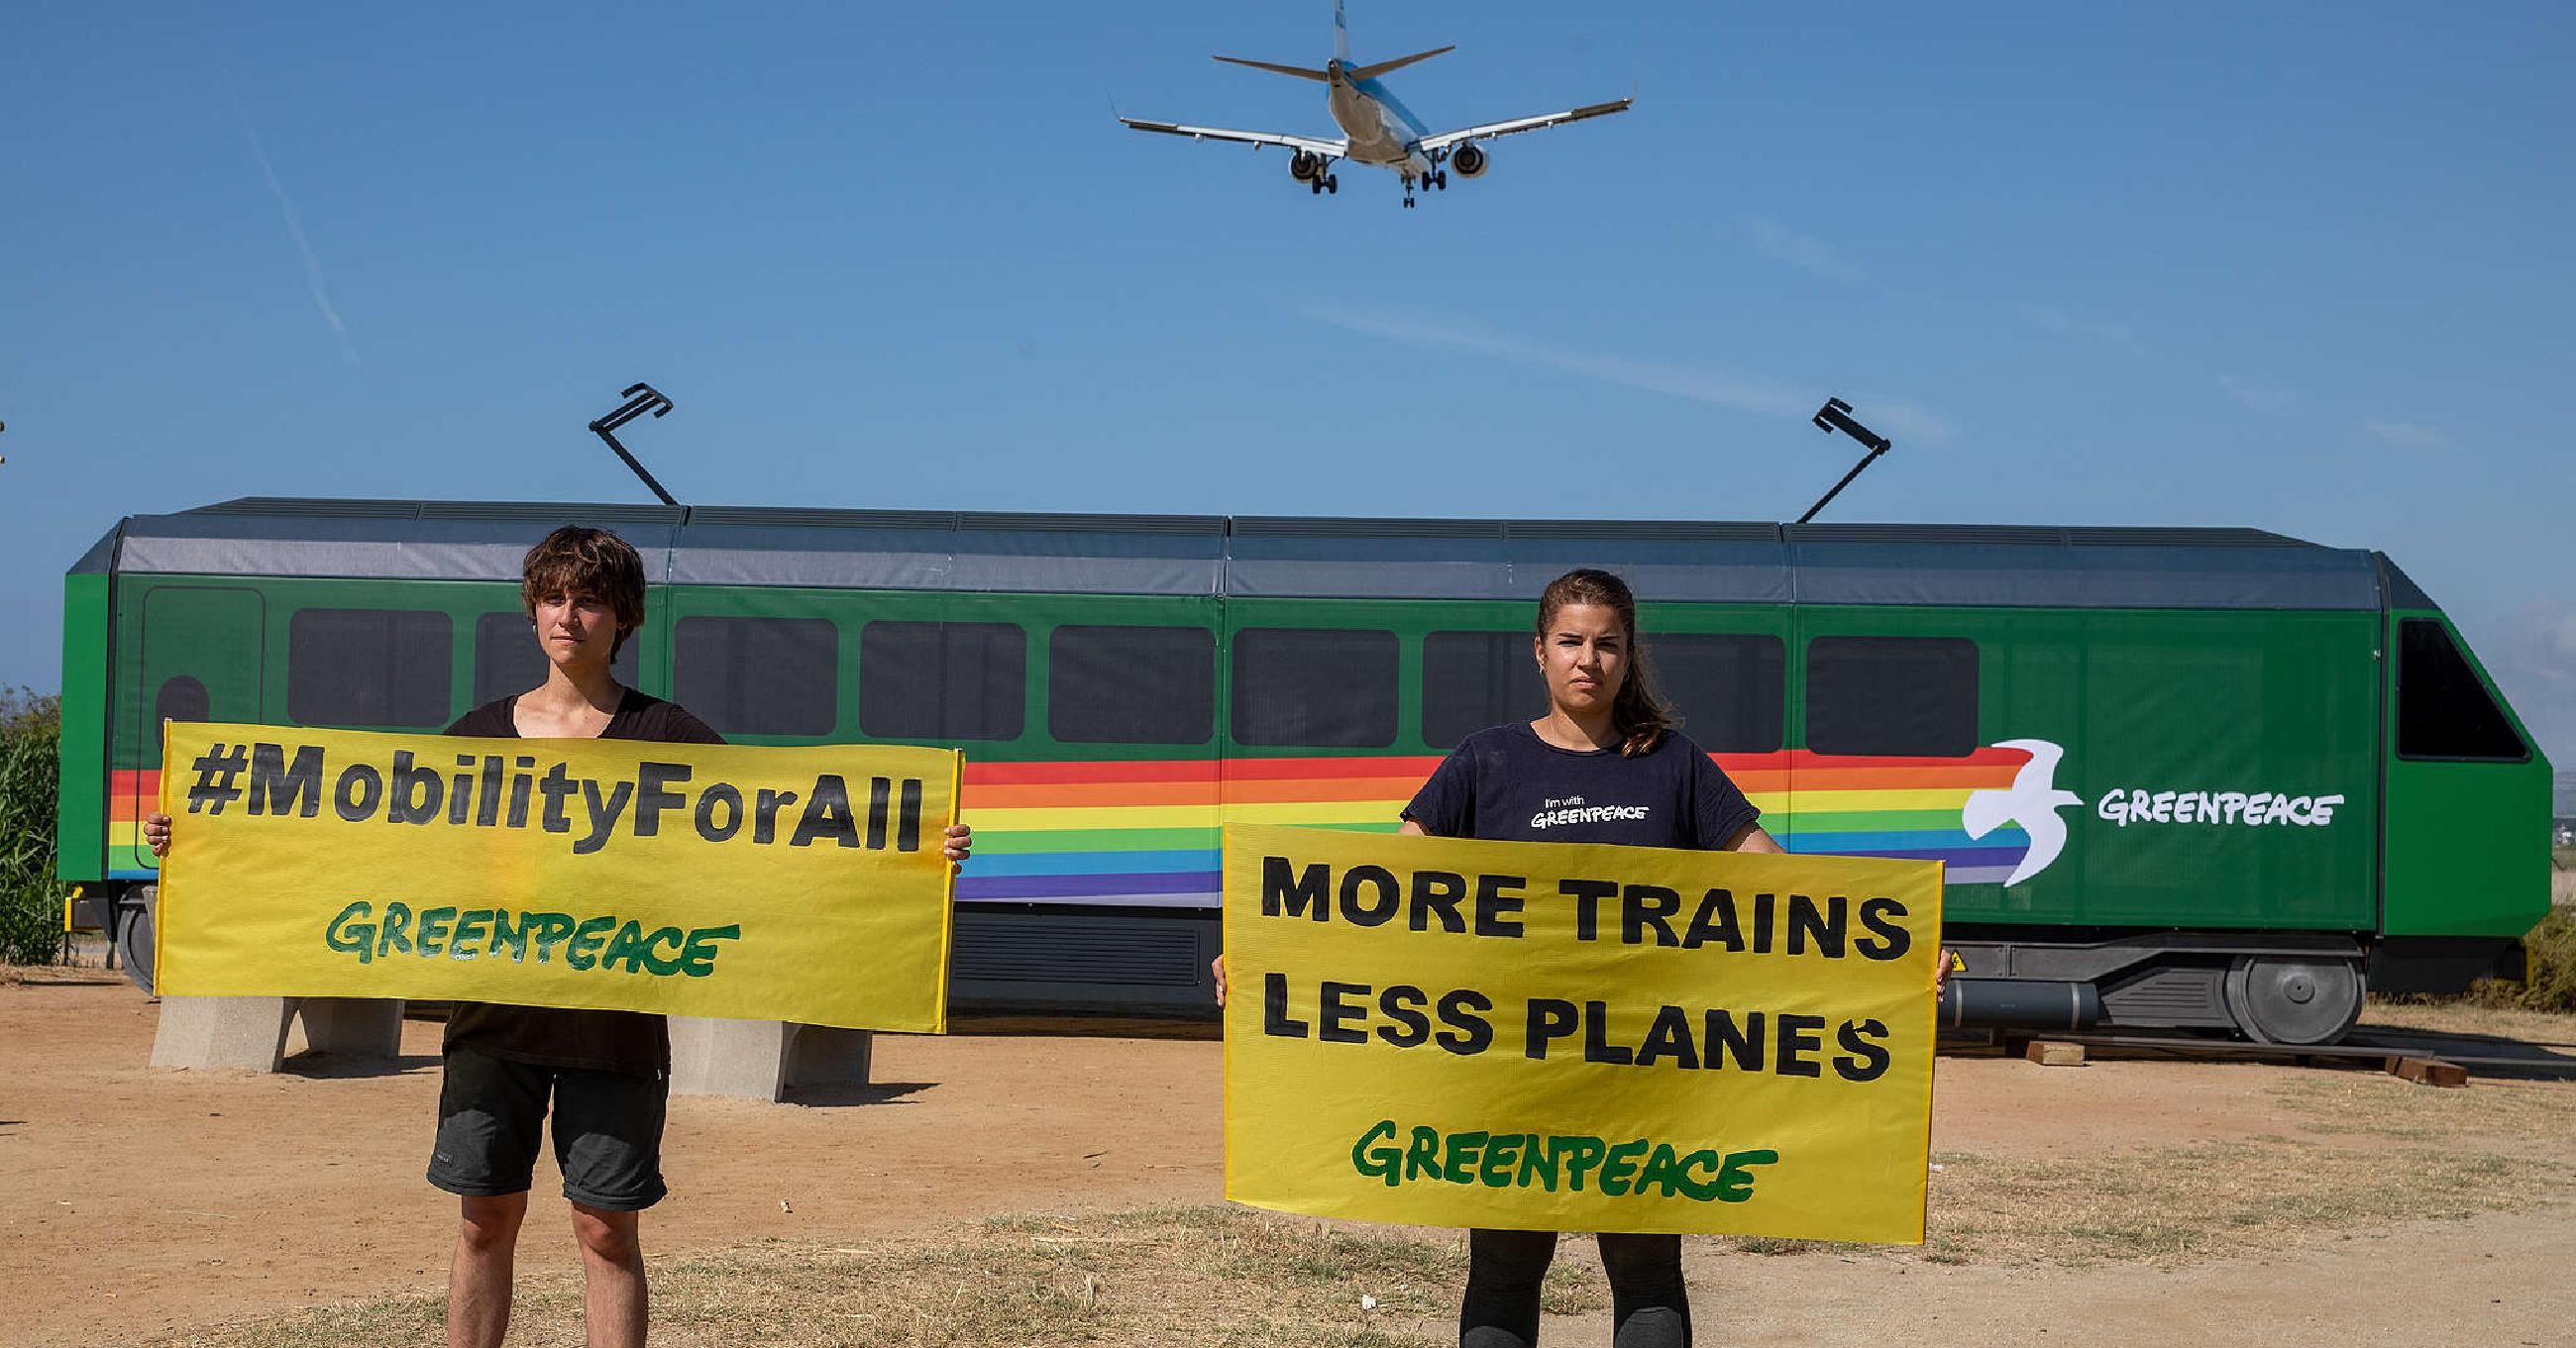 Greenpeace holds anti-expansion action at El Prat Airport